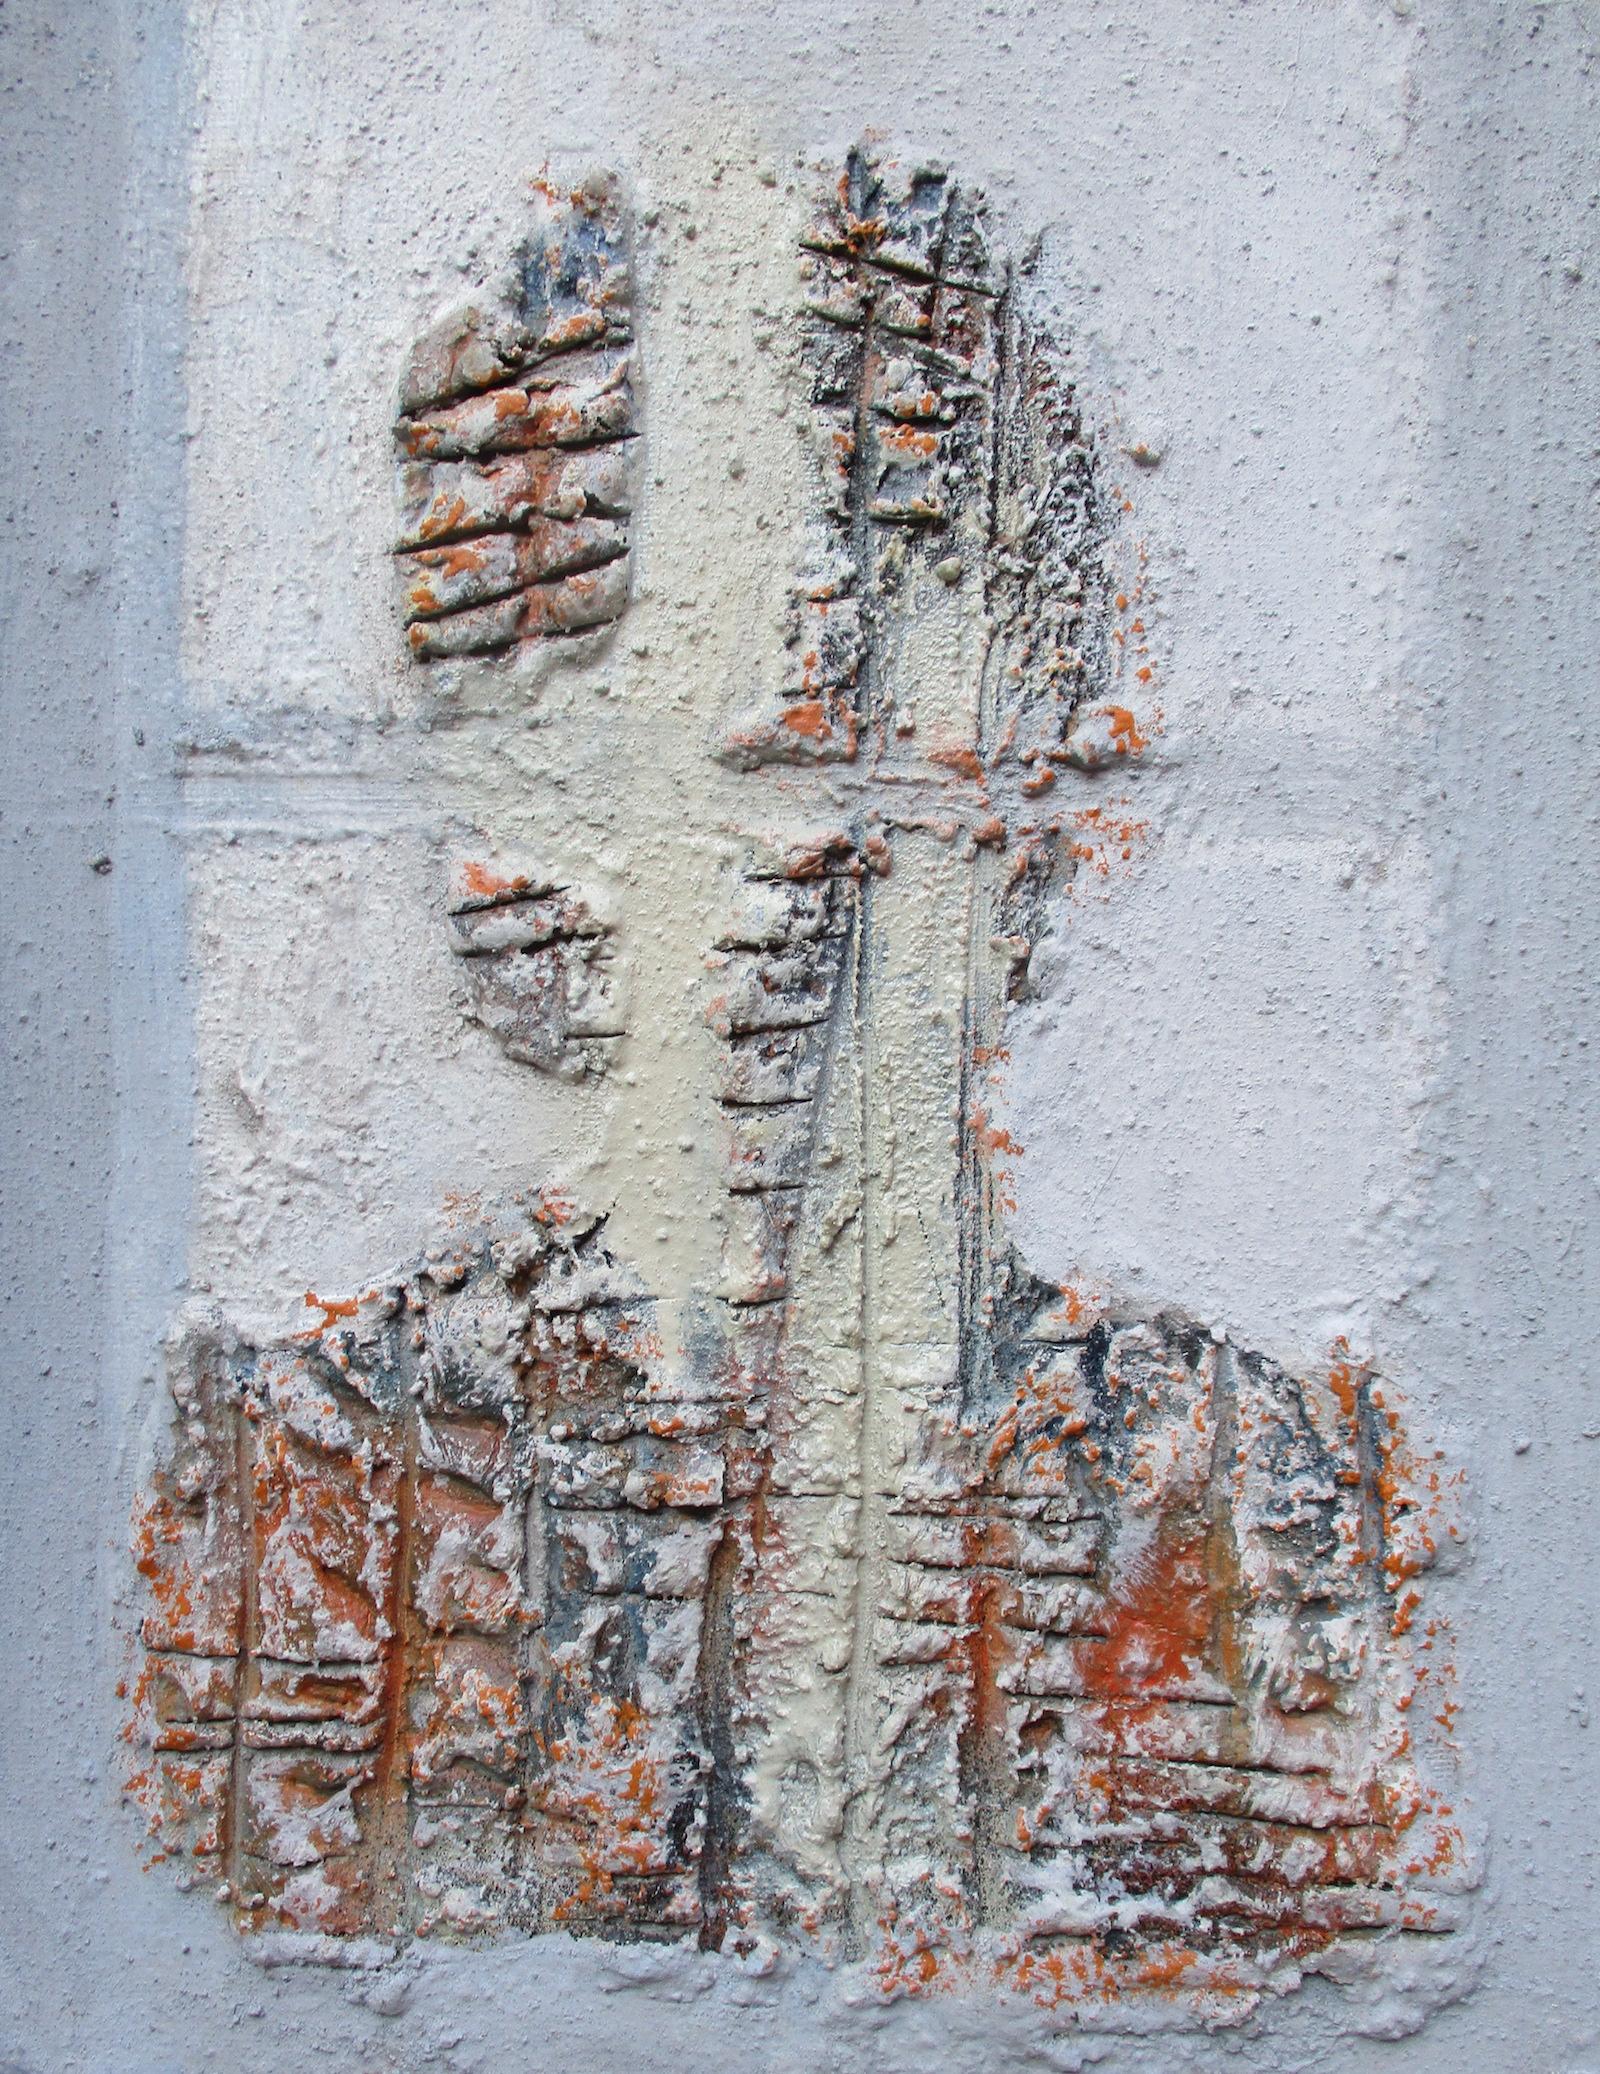 Modernist abstracted Head  - Mixed Media Art by Erik Scholz